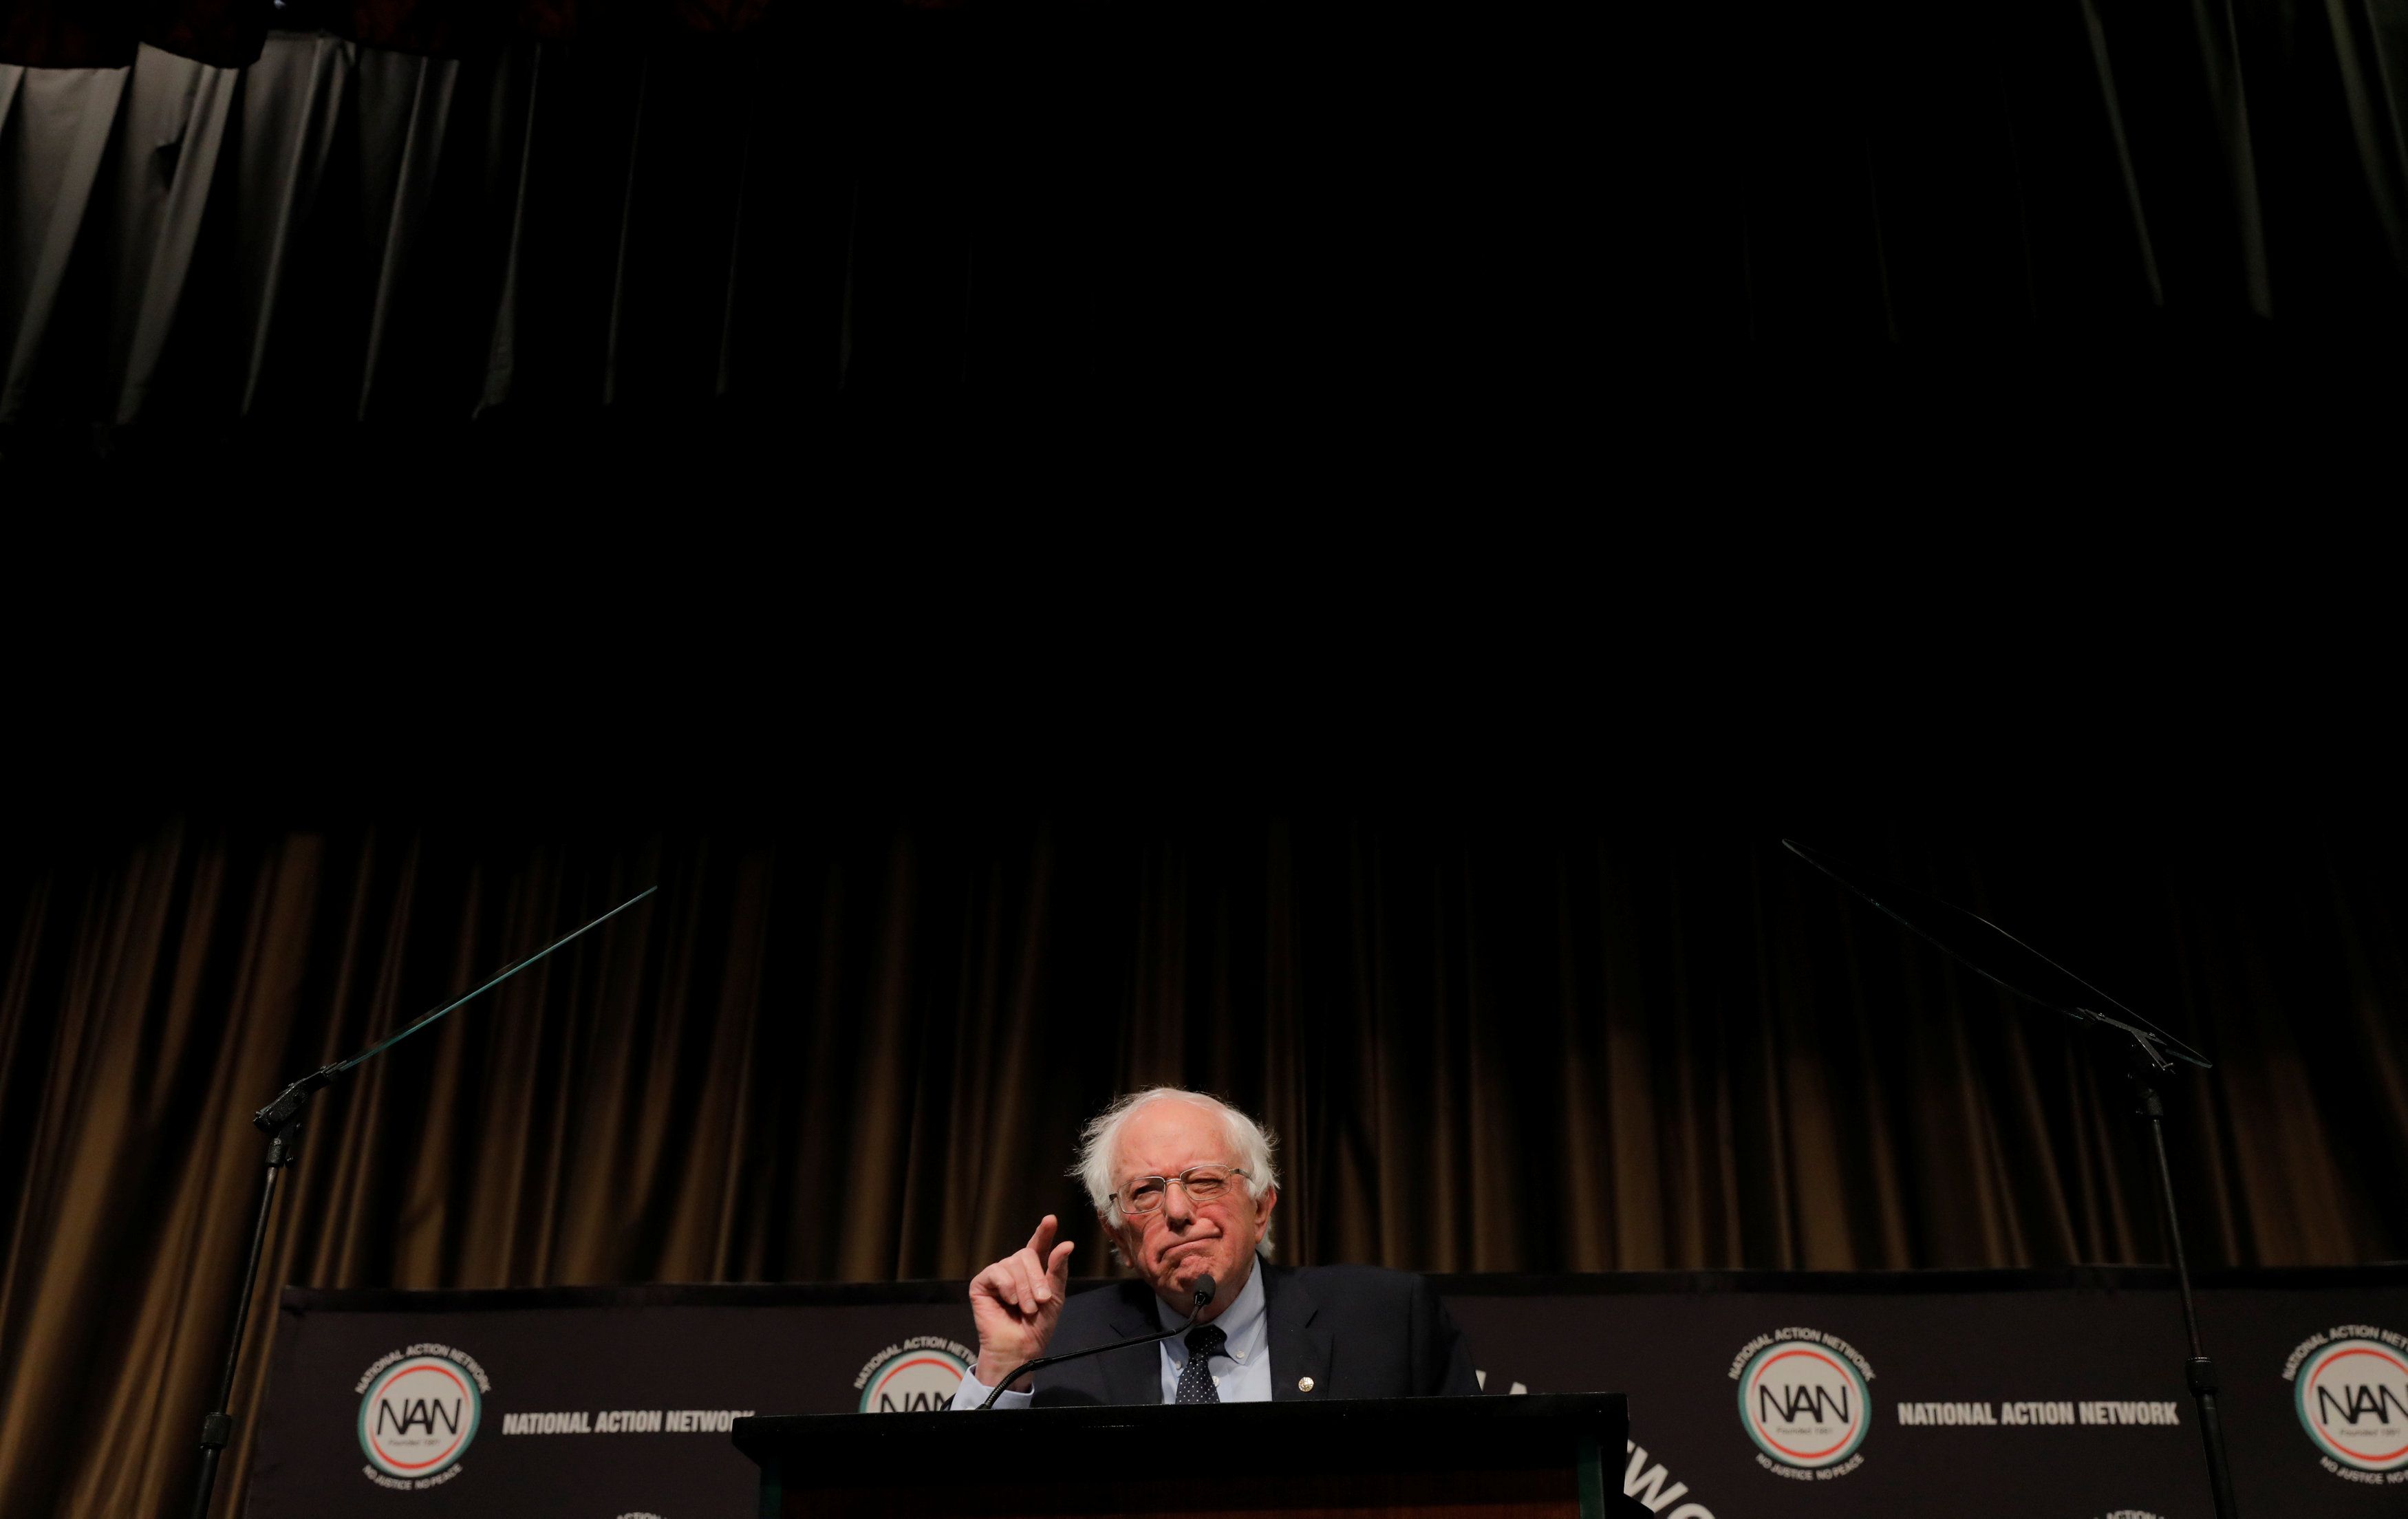 U.S. 2020 Democratic presidential candidate and U.S. Senator Bernie Sanders (I-VT), speaks at the 2019 National Action Network National Convention in New York, U.S., April 5, 2019. REUTERS/Lucas Jackson